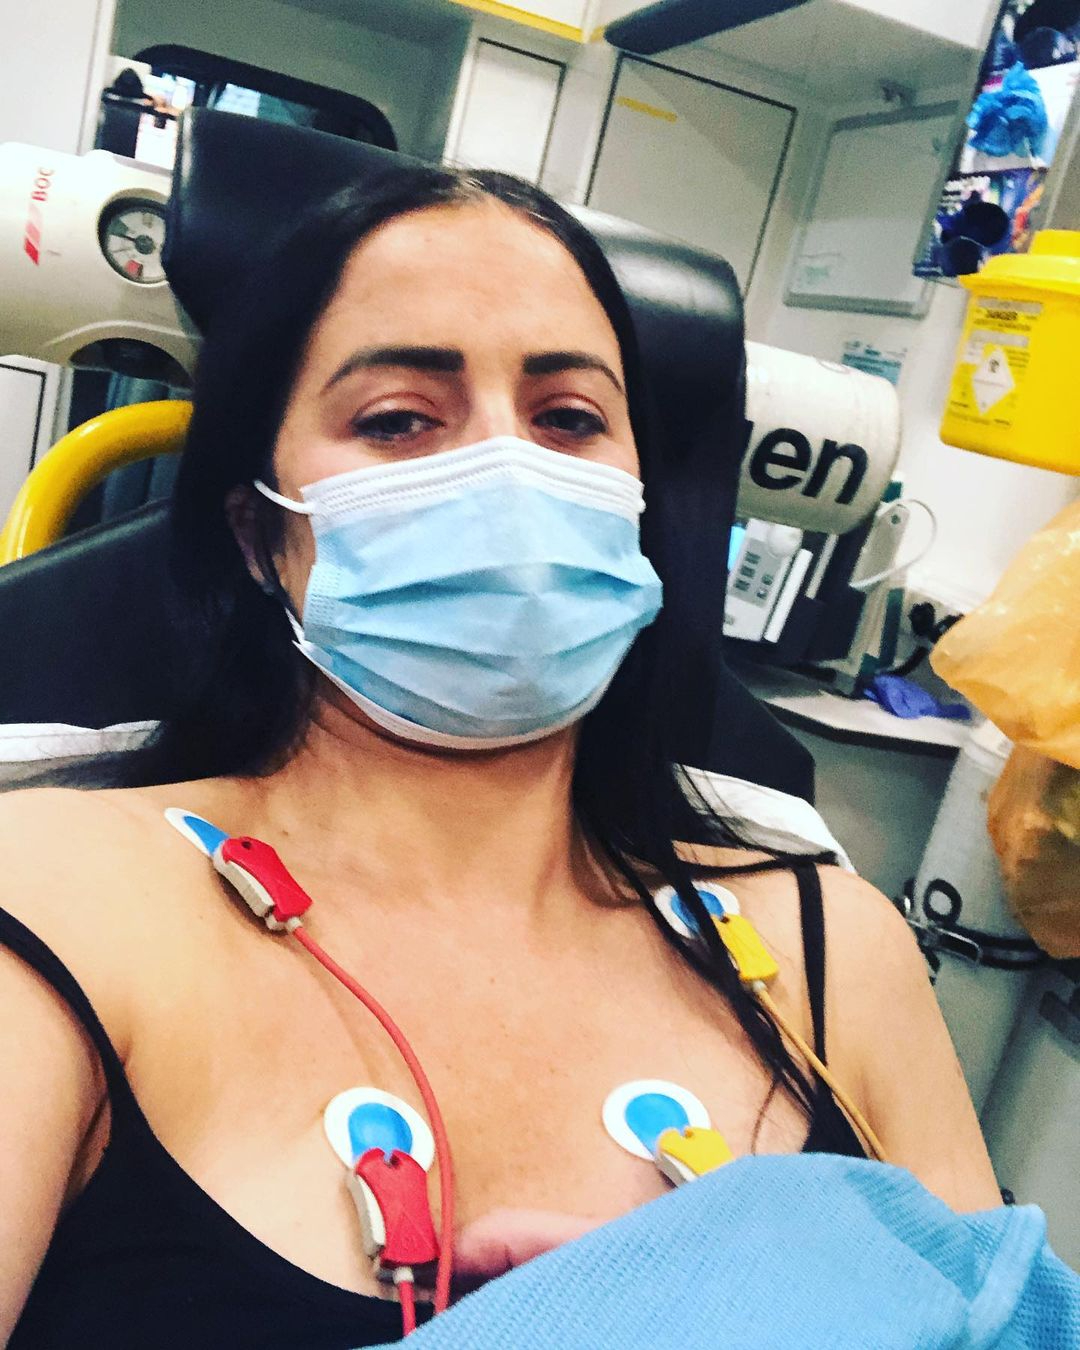 Getting fat made everyone make a huge assumption about me – after losing 3.7st I feel reborn, says Chantelle Houghton